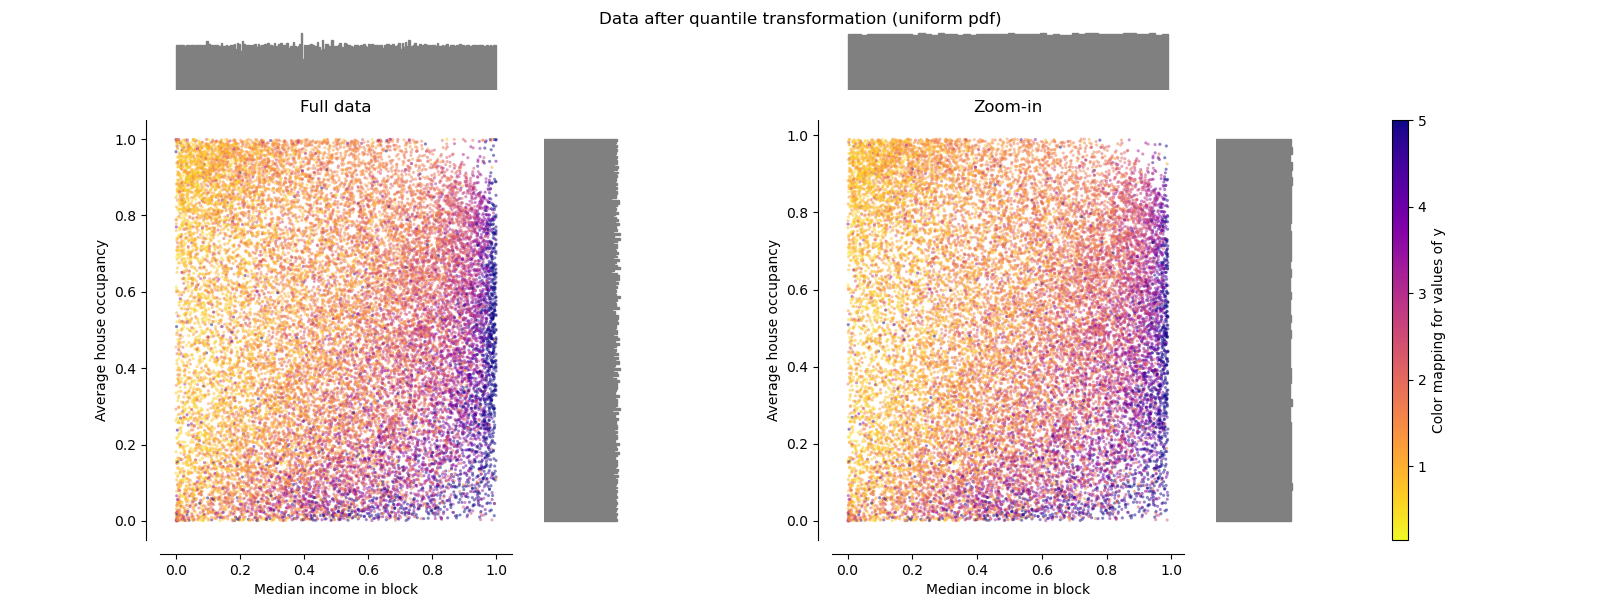 Data after quantile transformation (uniform pdf), Full data, Zoom-in